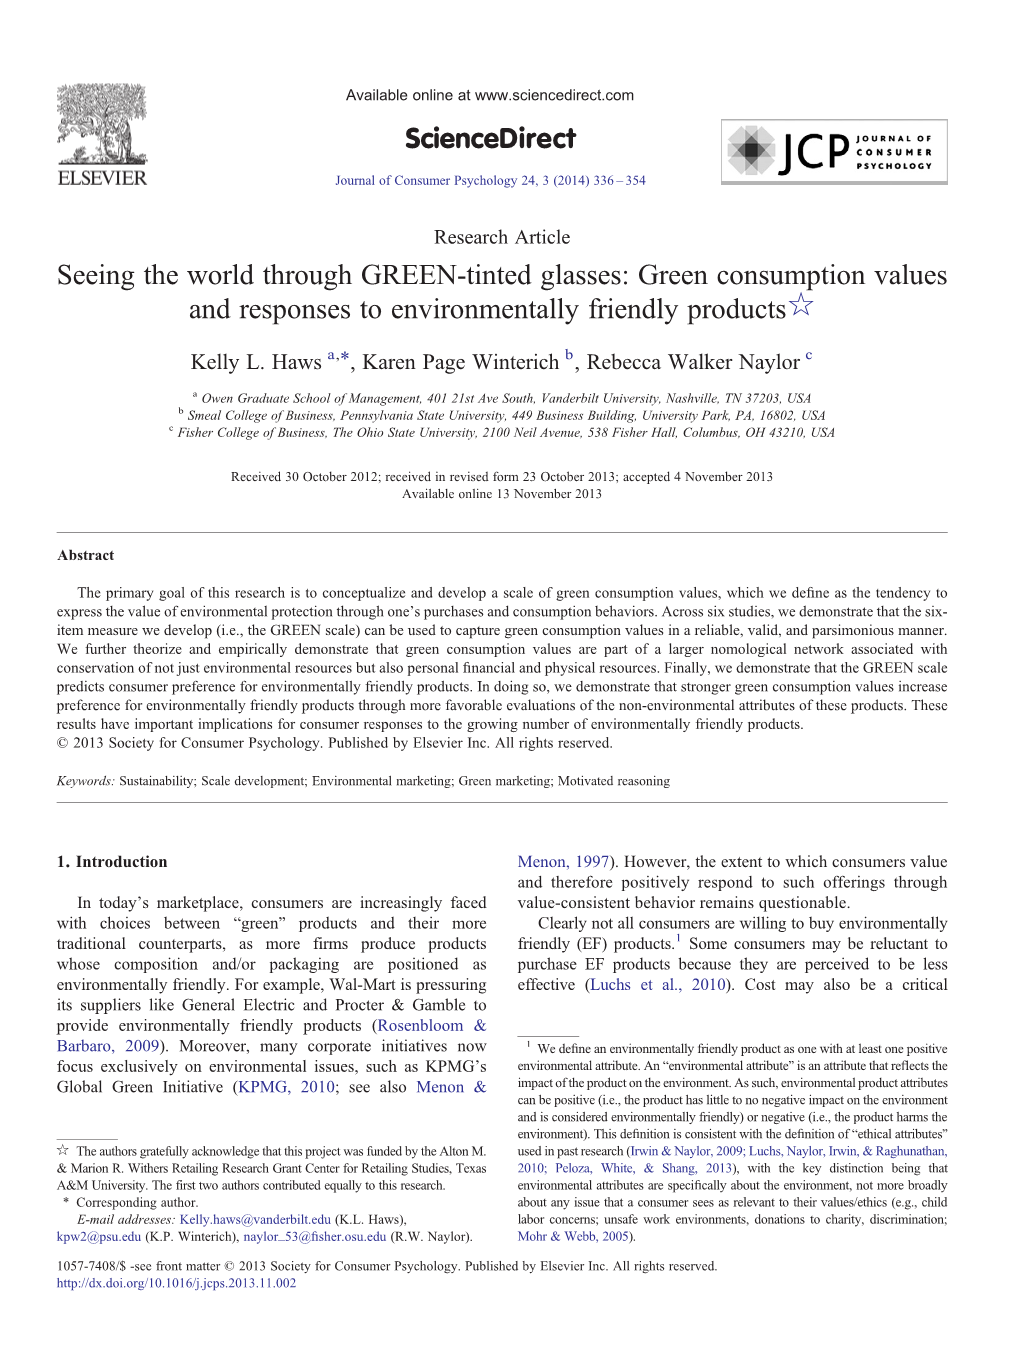 Seeing the World Through GREEN-Tinted Glasses: Green Consumption Values and Responses to Environmentally Friendly Products☆ ⁎ Kelly L